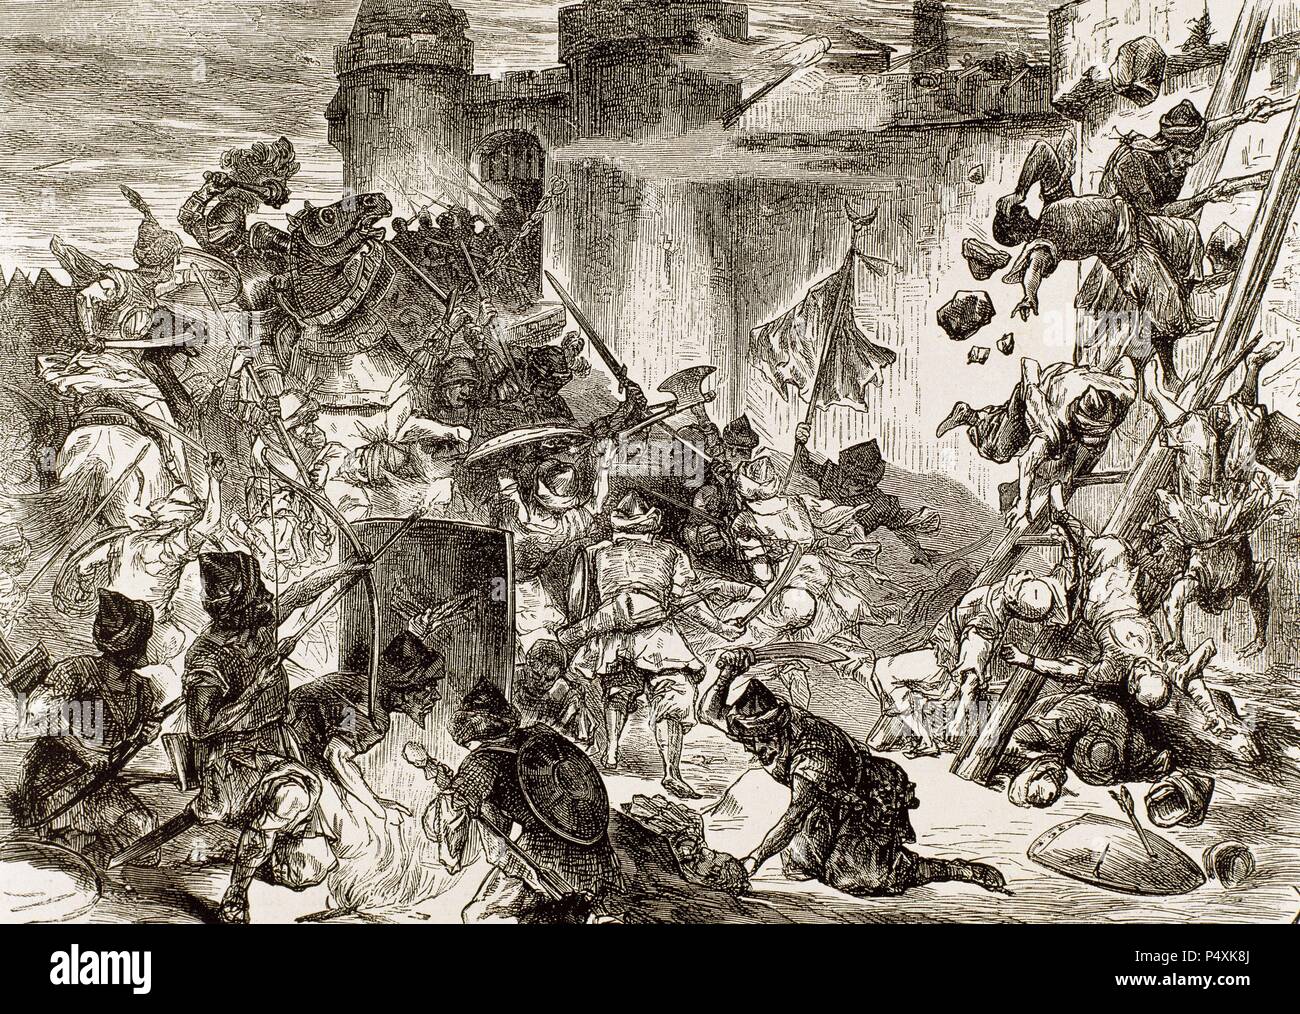 The Battle of Vienna (11 and 12 of September, 1683) after Vienna had been besieged by the Ottoman Empire for two months. Engraving, 1882. Stock Photo